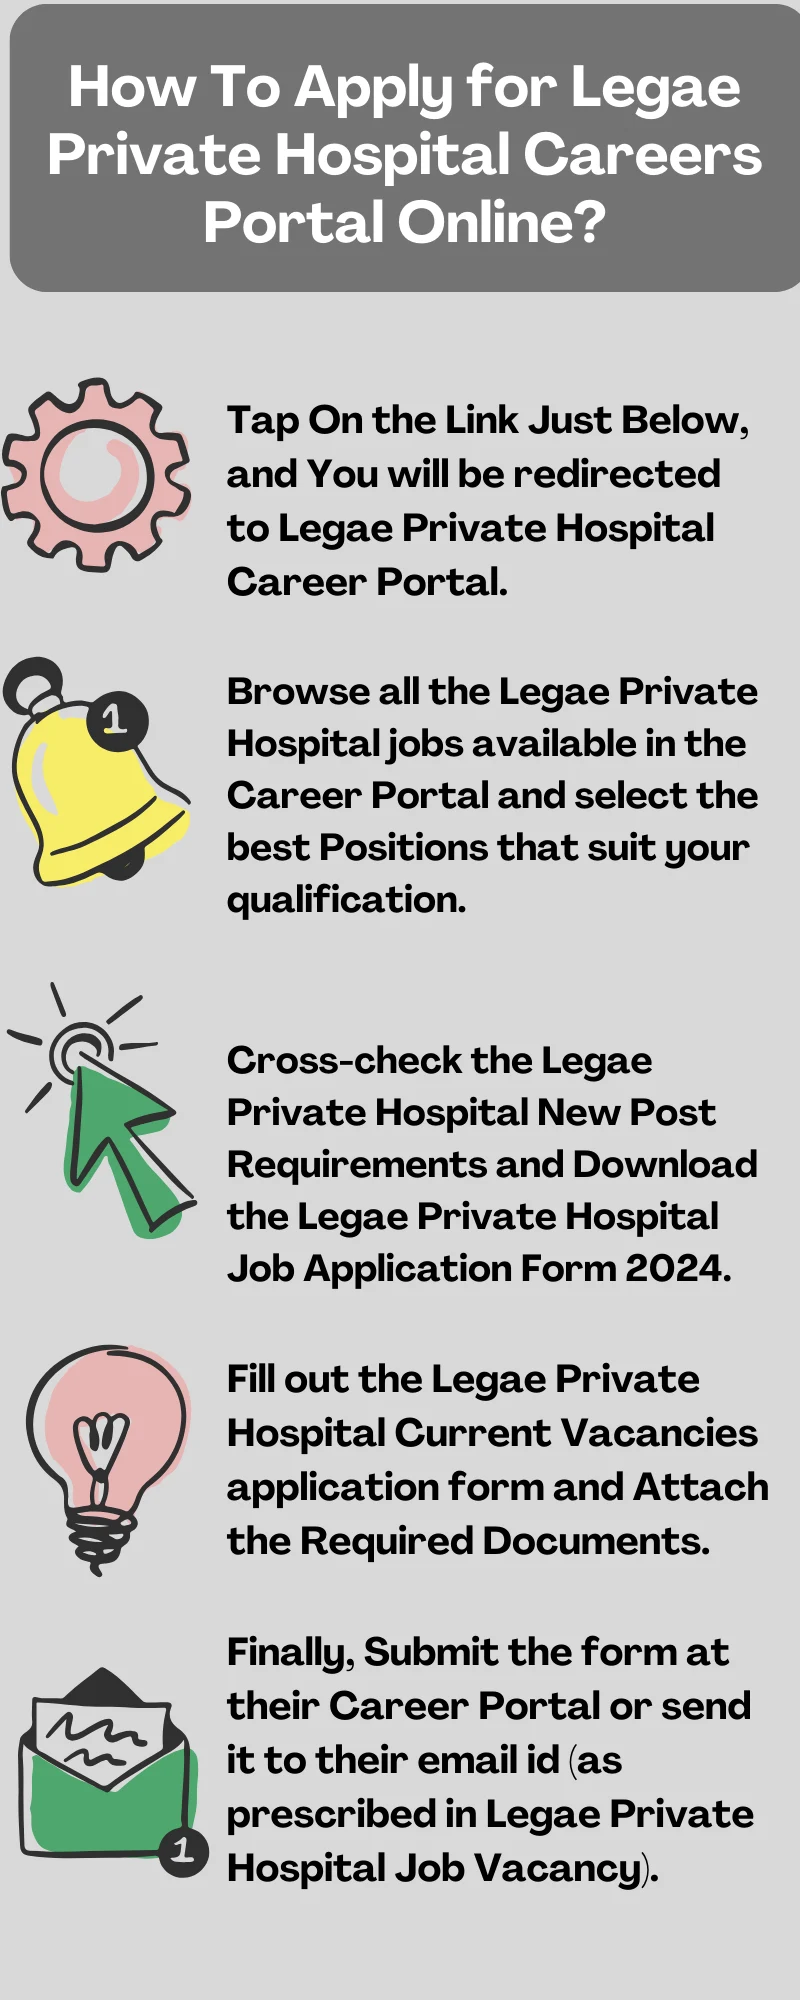 How To Apply for Legae Private Hospital Careers Portal Online?